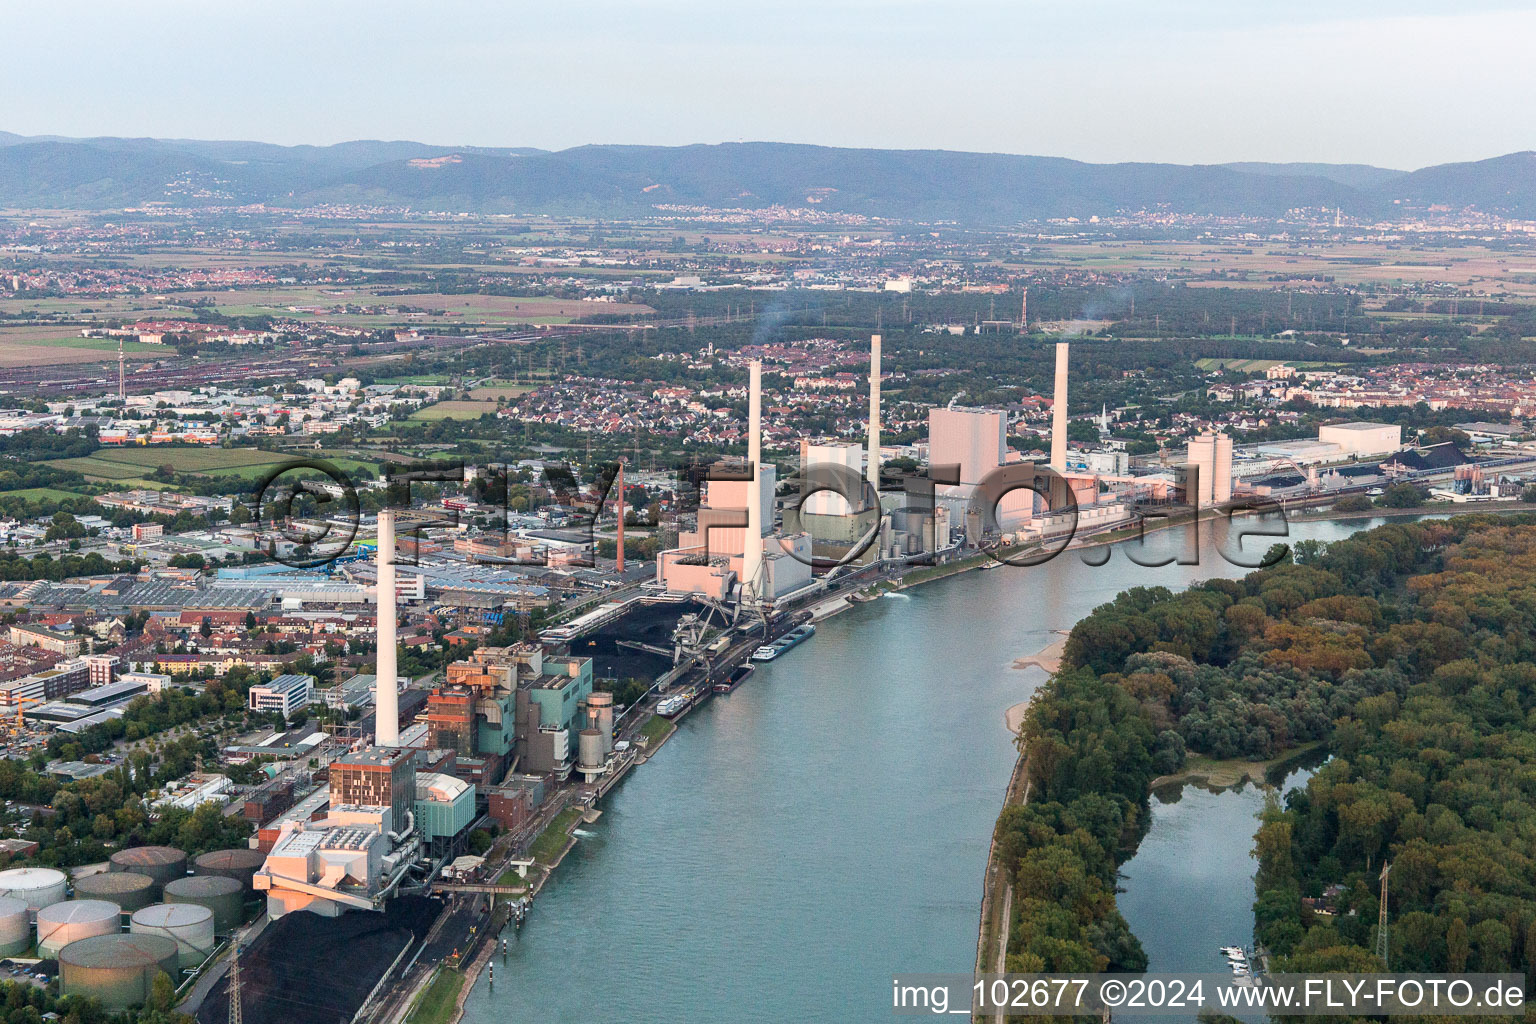 GKM in the district Neckarau in Mannheim in the state Baden-Wuerttemberg, Germany out of the air